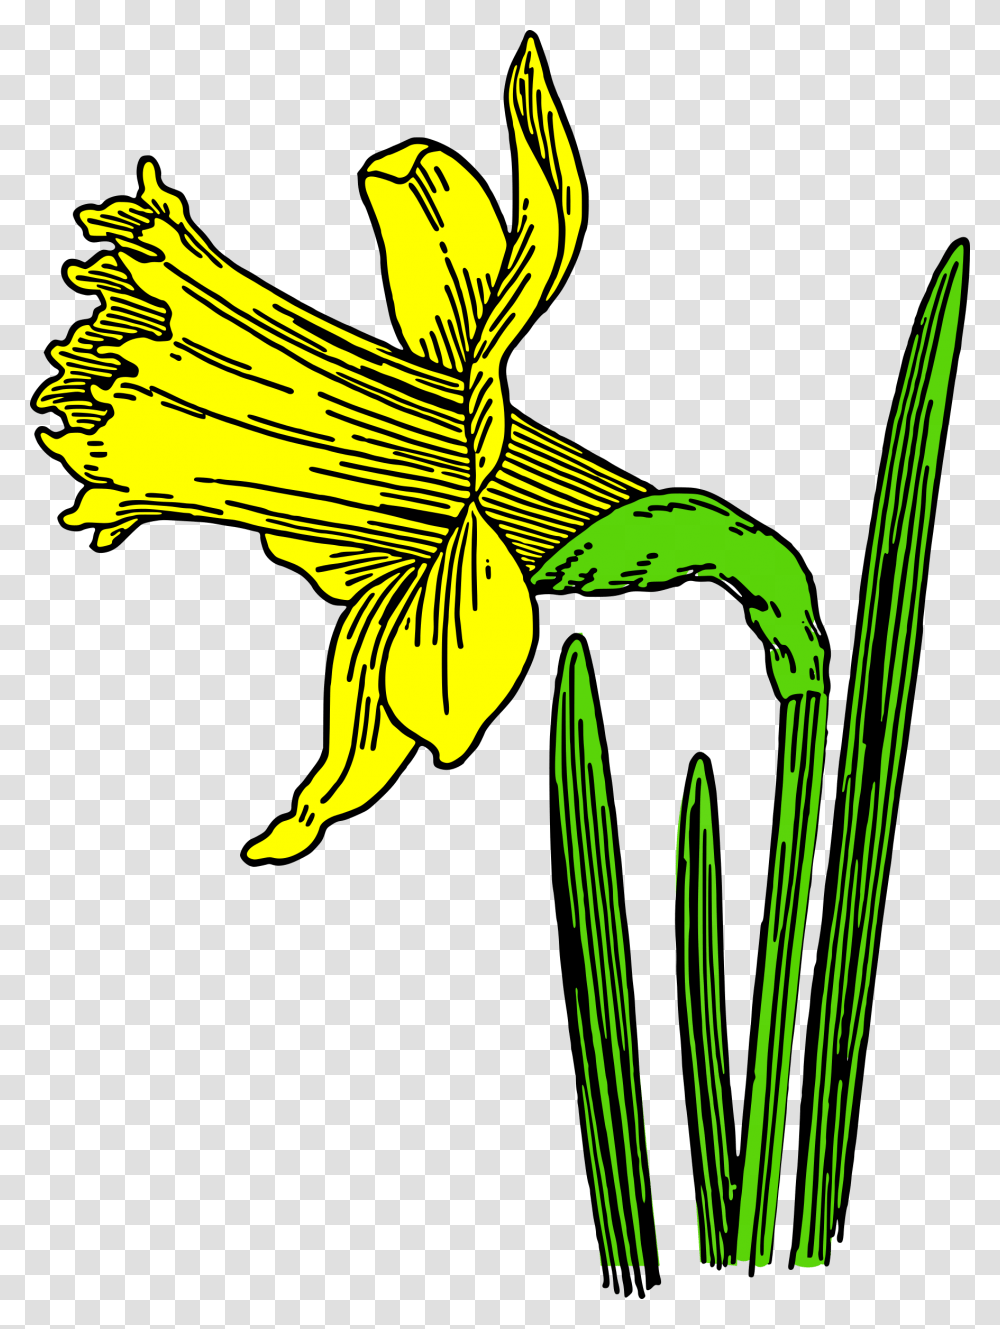 Colored Daffodil Clip Arts Cartoon Daffodils, Plant, Flower, Blossom, Lily Transparent Png